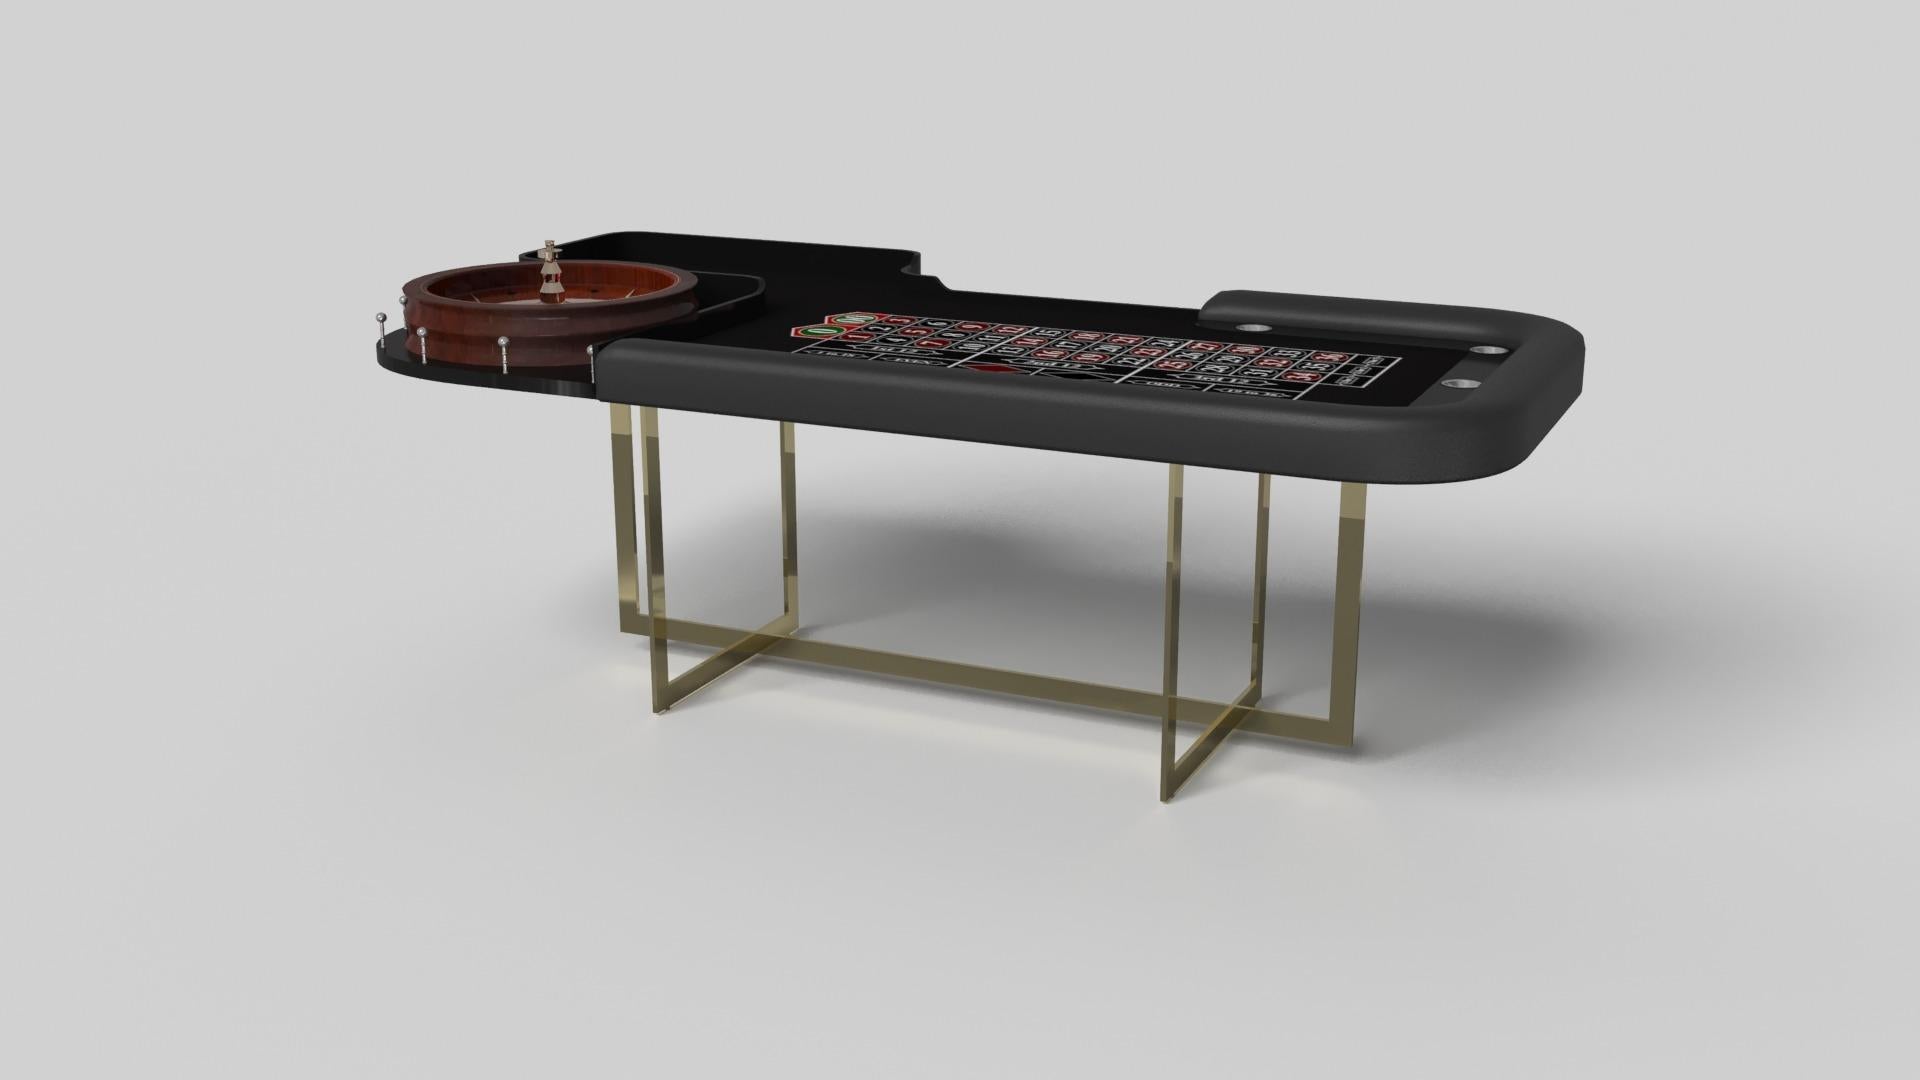 With an open metal foundation, our Beso table is a unique expression of contemporary forms and negative space. This roulette table is handcrafted by our master artisans with a rectangle-in-rectangle base that echoes the angles and edges of a